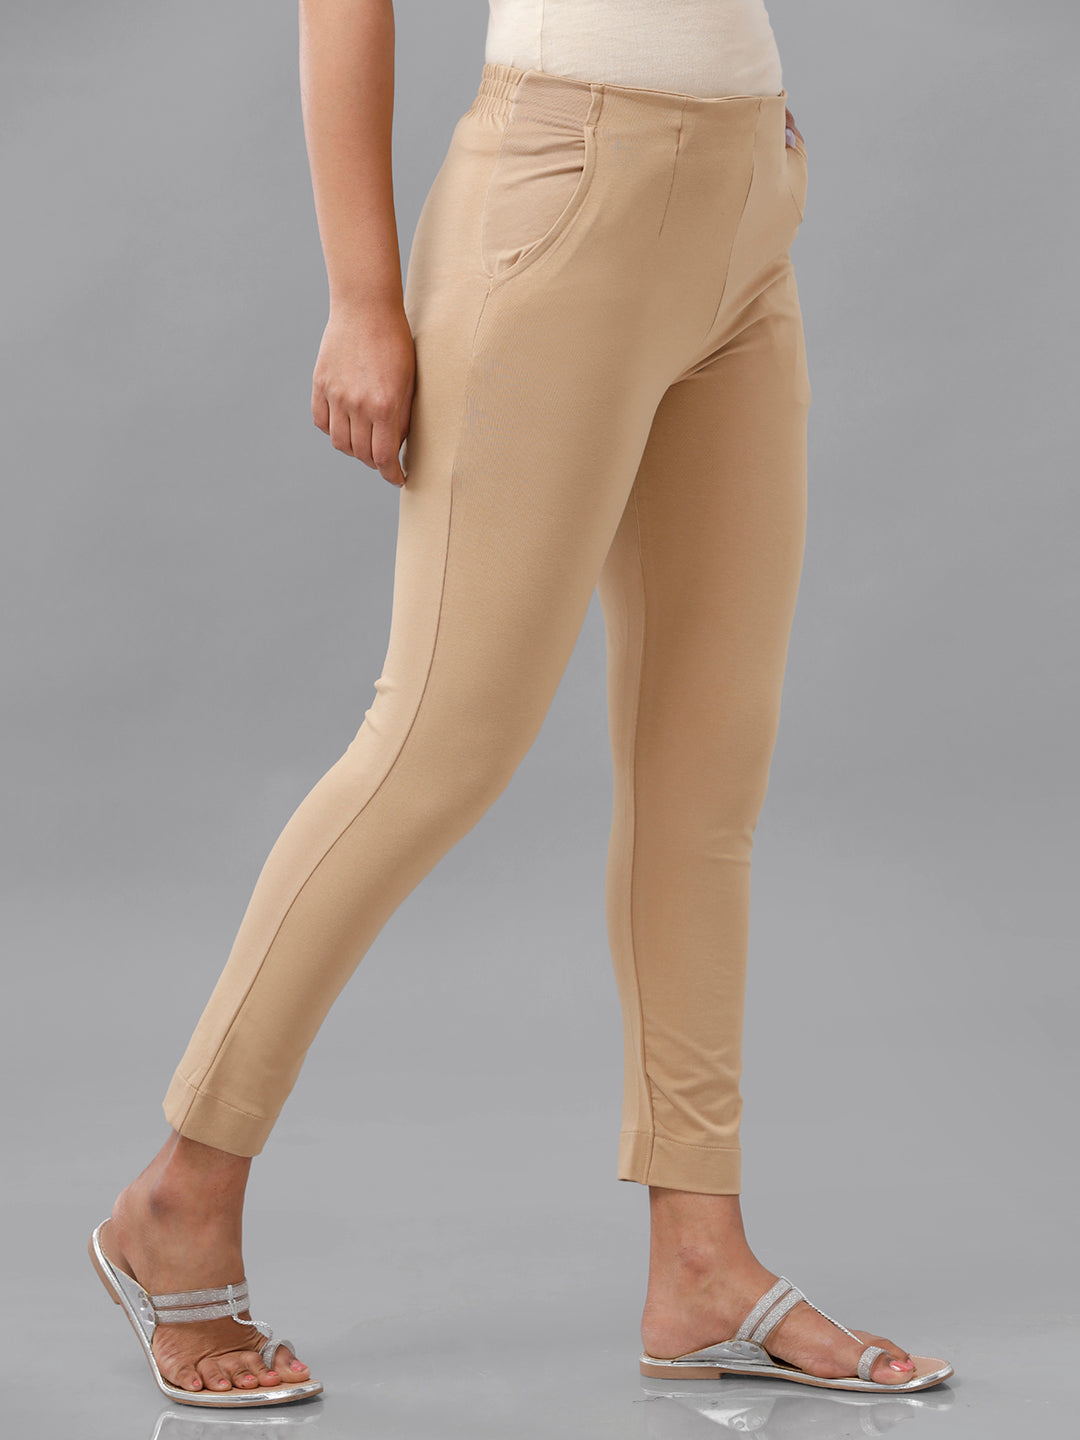 Buy By FBB Beige Cotton Solid Ankle Length Cigarette Pants online |  Looksgud.in